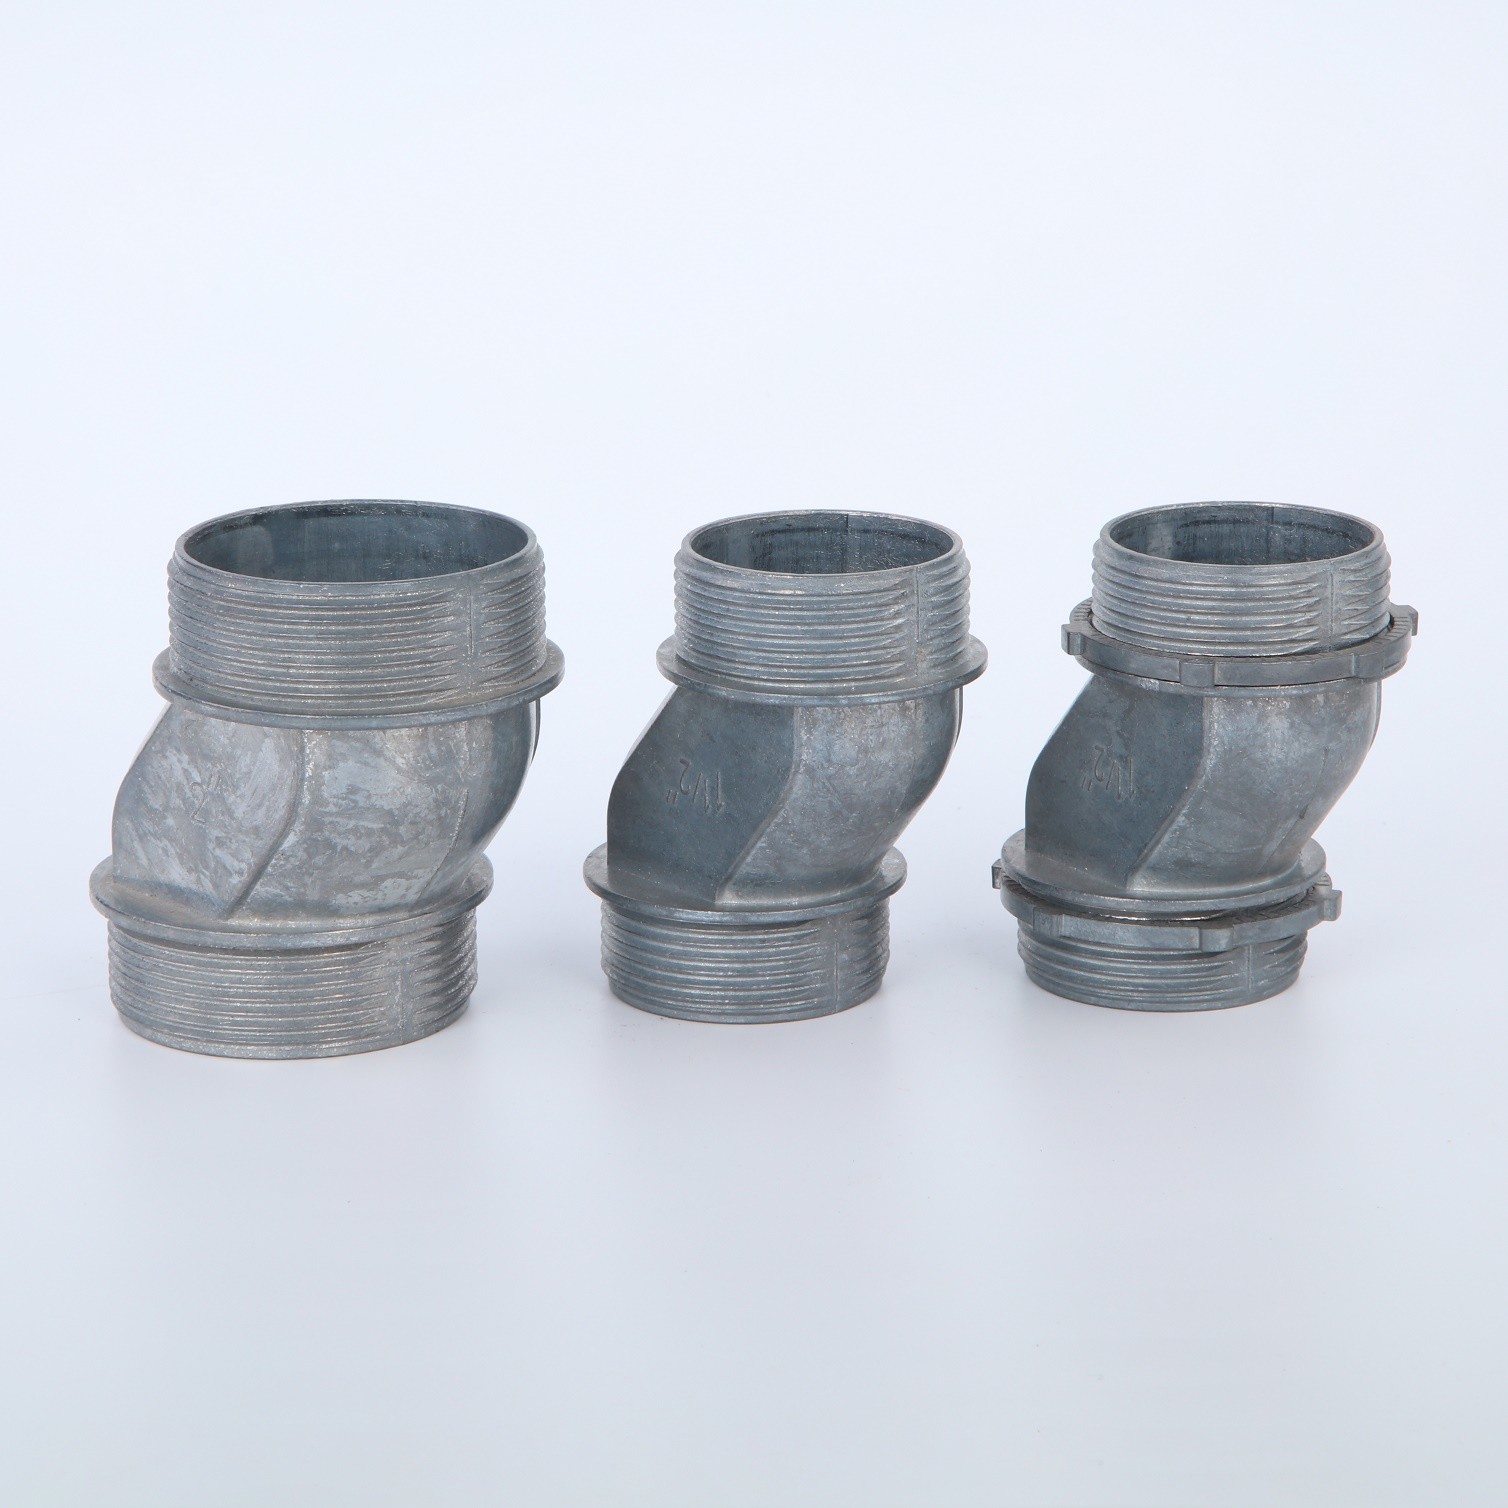 Best 1-1/4" Rigid Conduit Offset Connector 45 Degree Pipe Connector To Steel Outlet Box Zinc Die Casting NPT Threads UL List wholesale